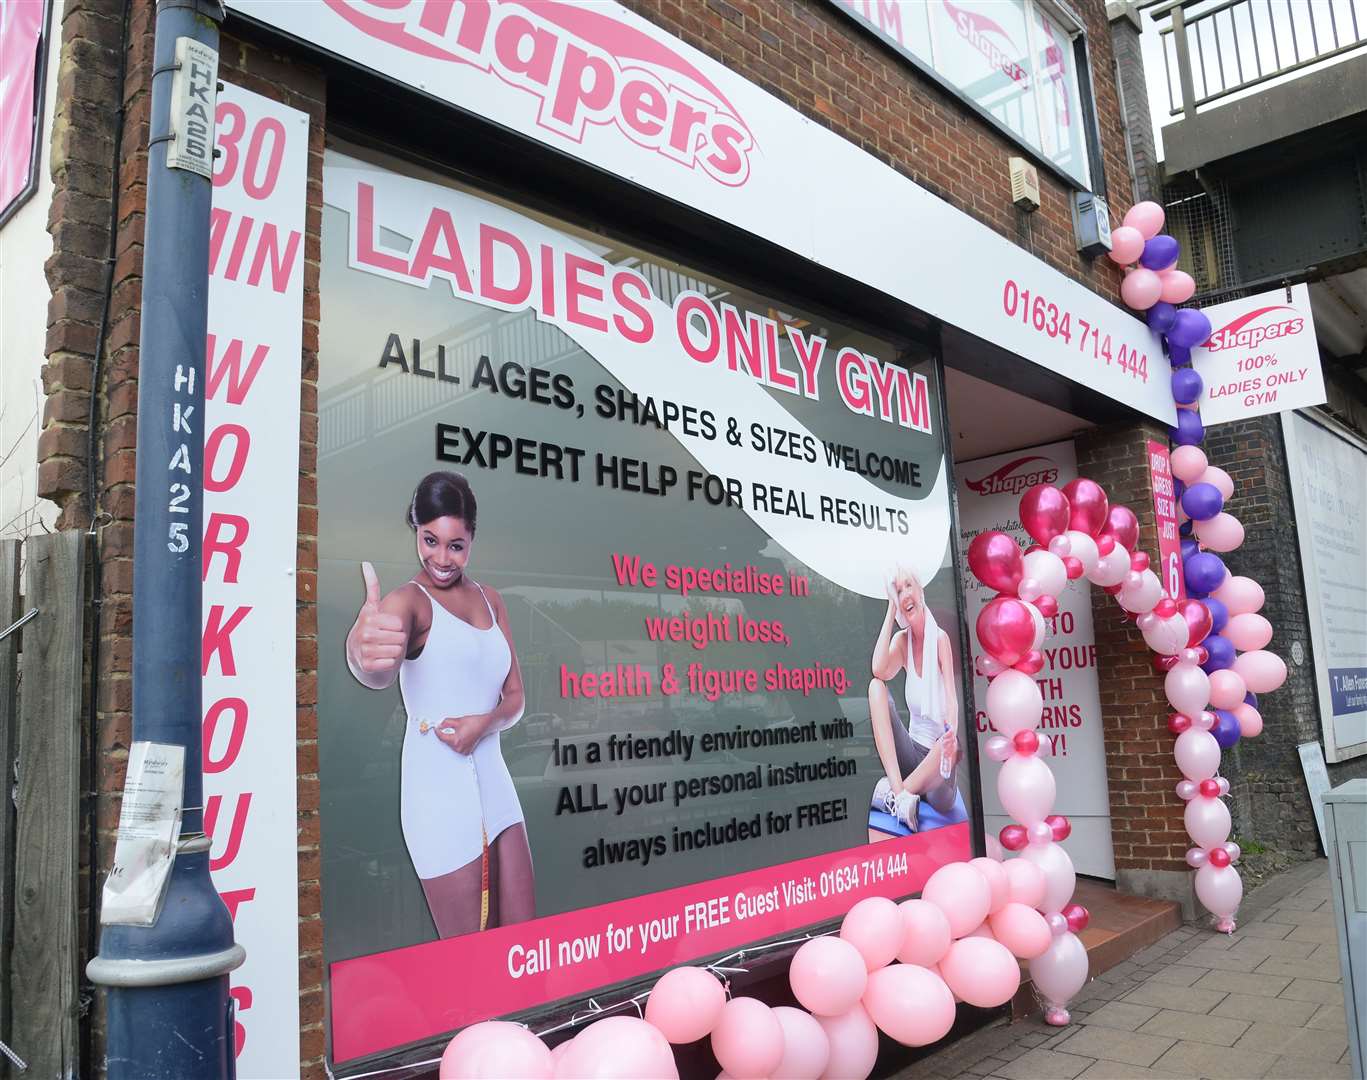 Shapers has a string of ladies only gyms across the South East. Picture: Gary Browne